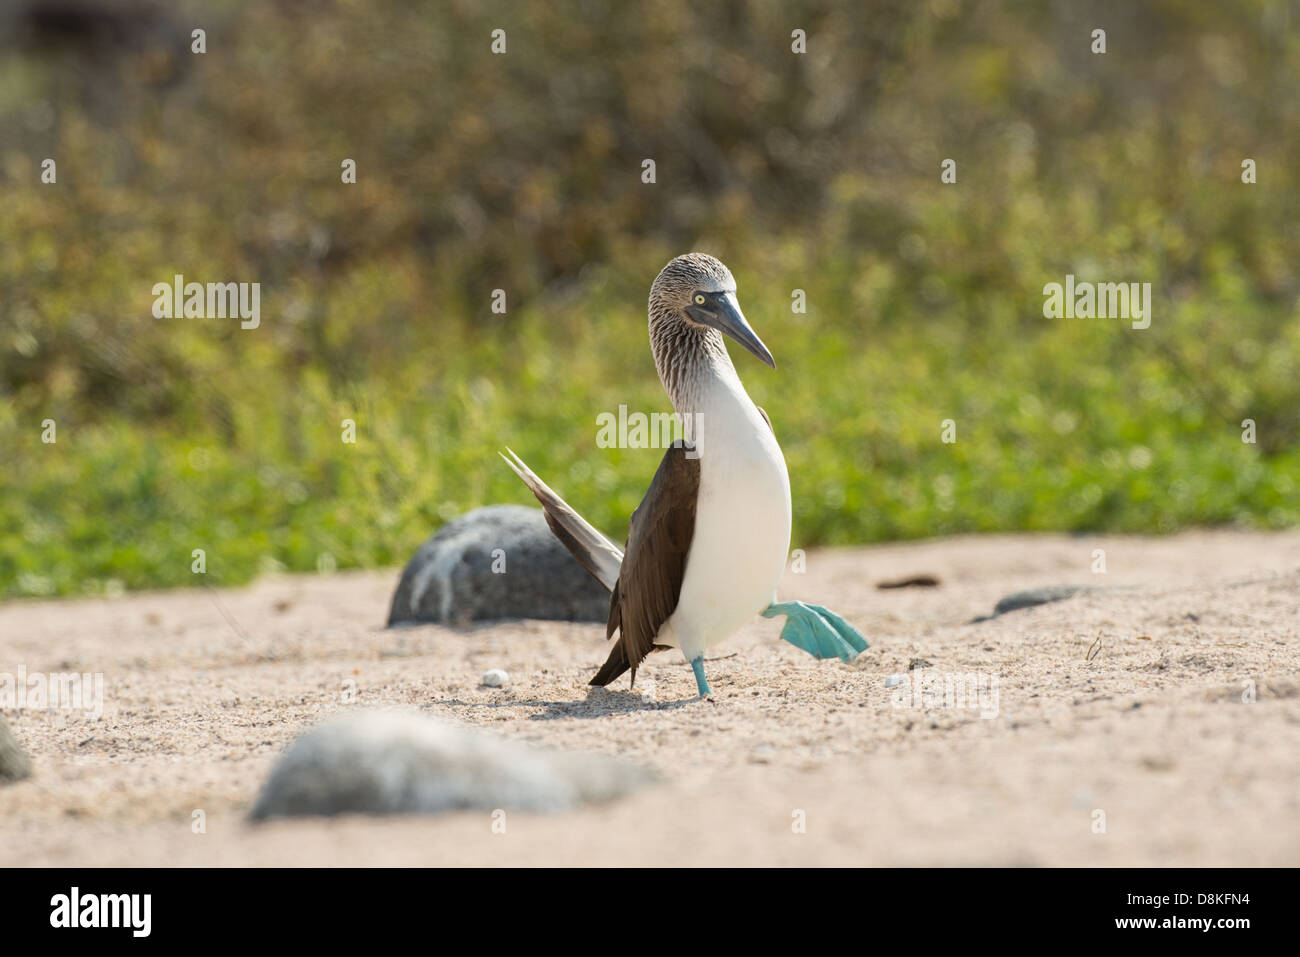 Stock photo of the breeding display of a blue footed booby, North Seymour Island, Galapagos Stock Photo